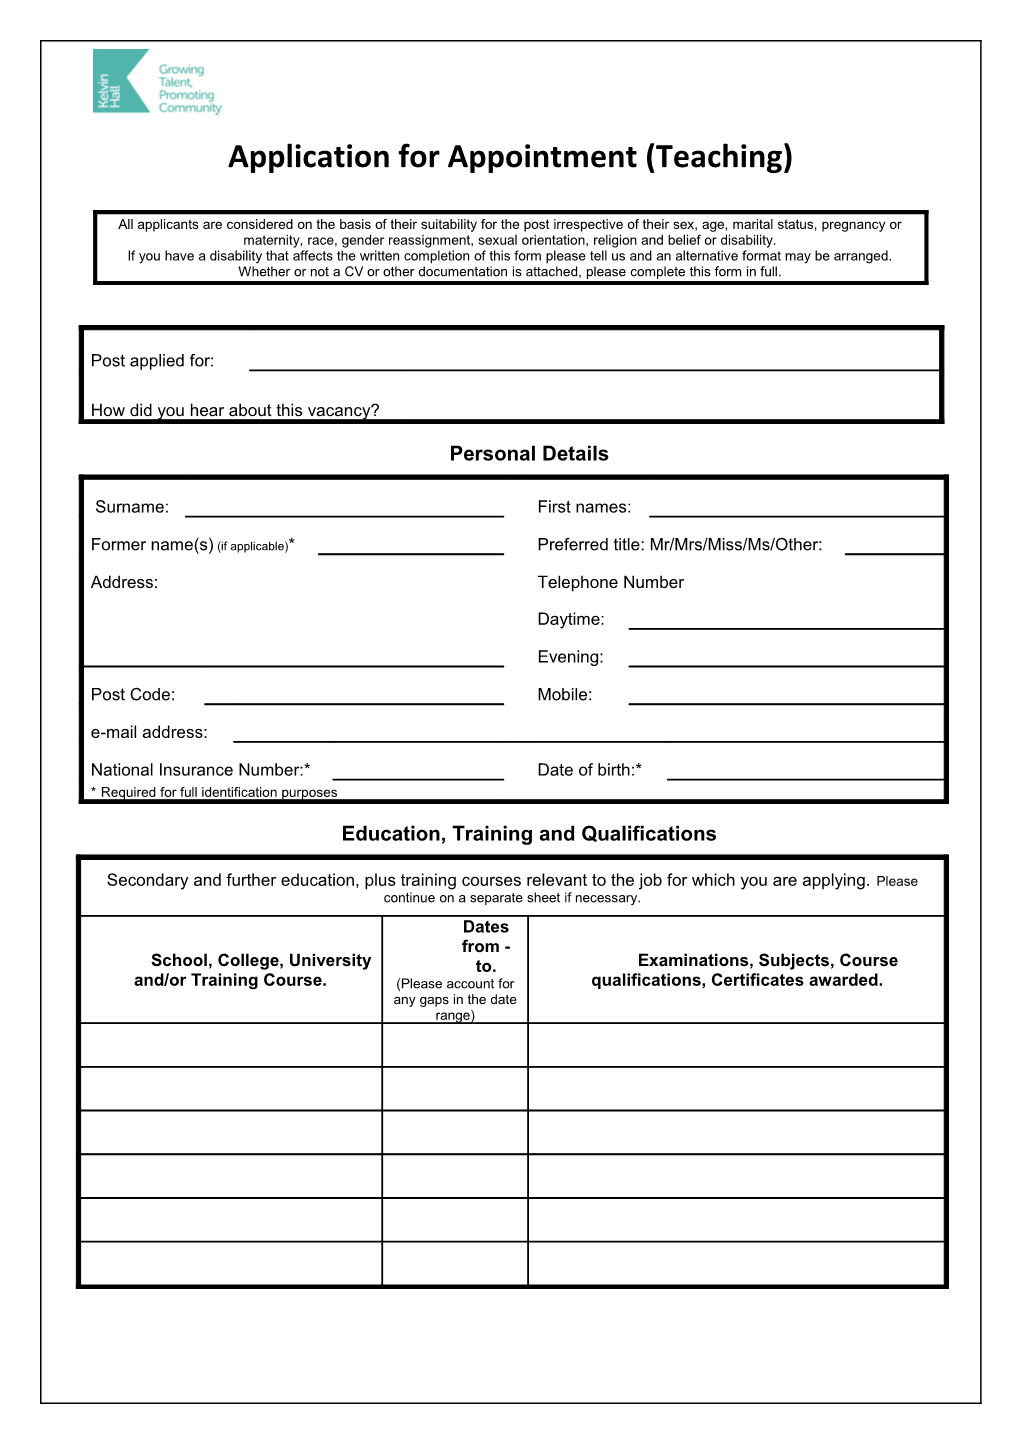 S1.1.3 Application Form for Employment (Teaching)